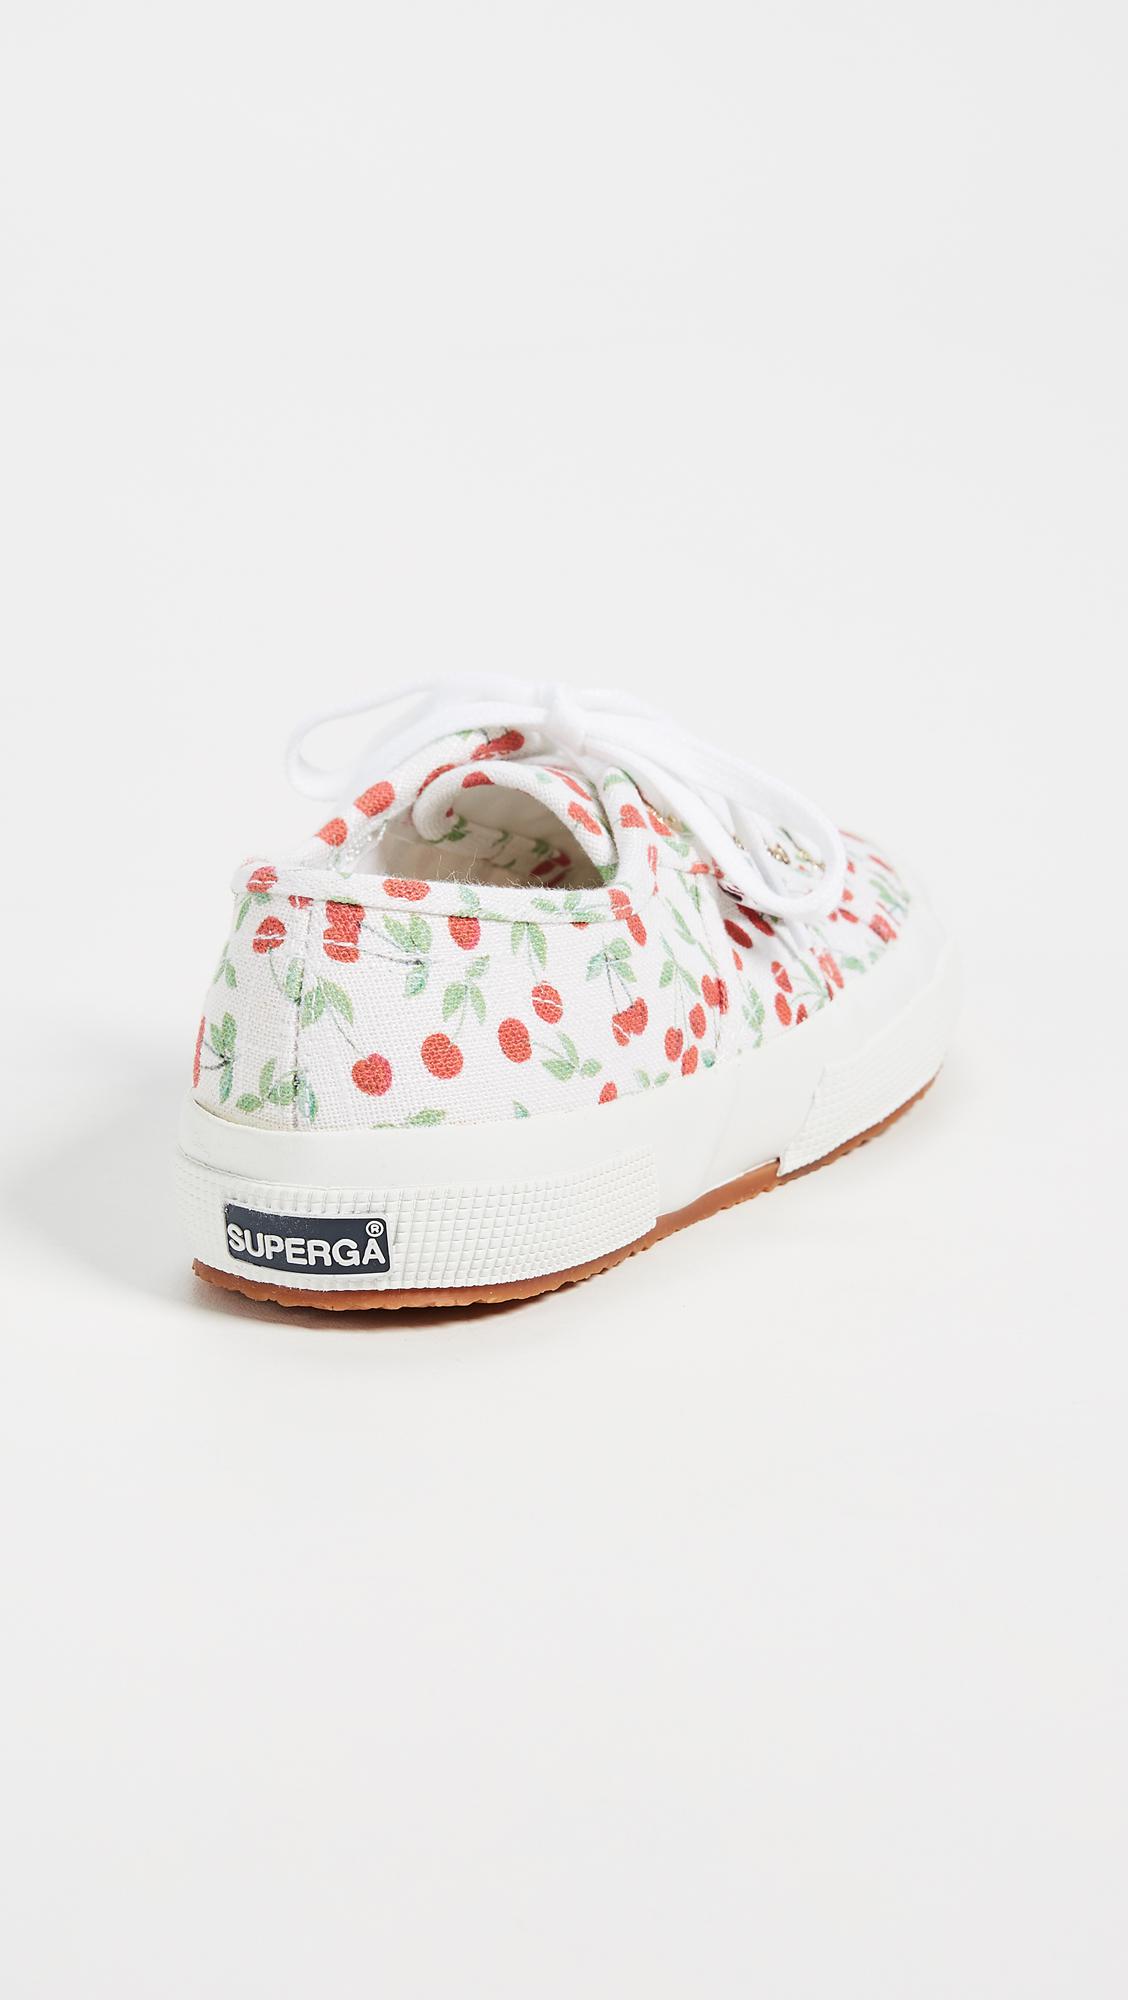 Superga 2750 Cherry Sneakers in White | Lyst